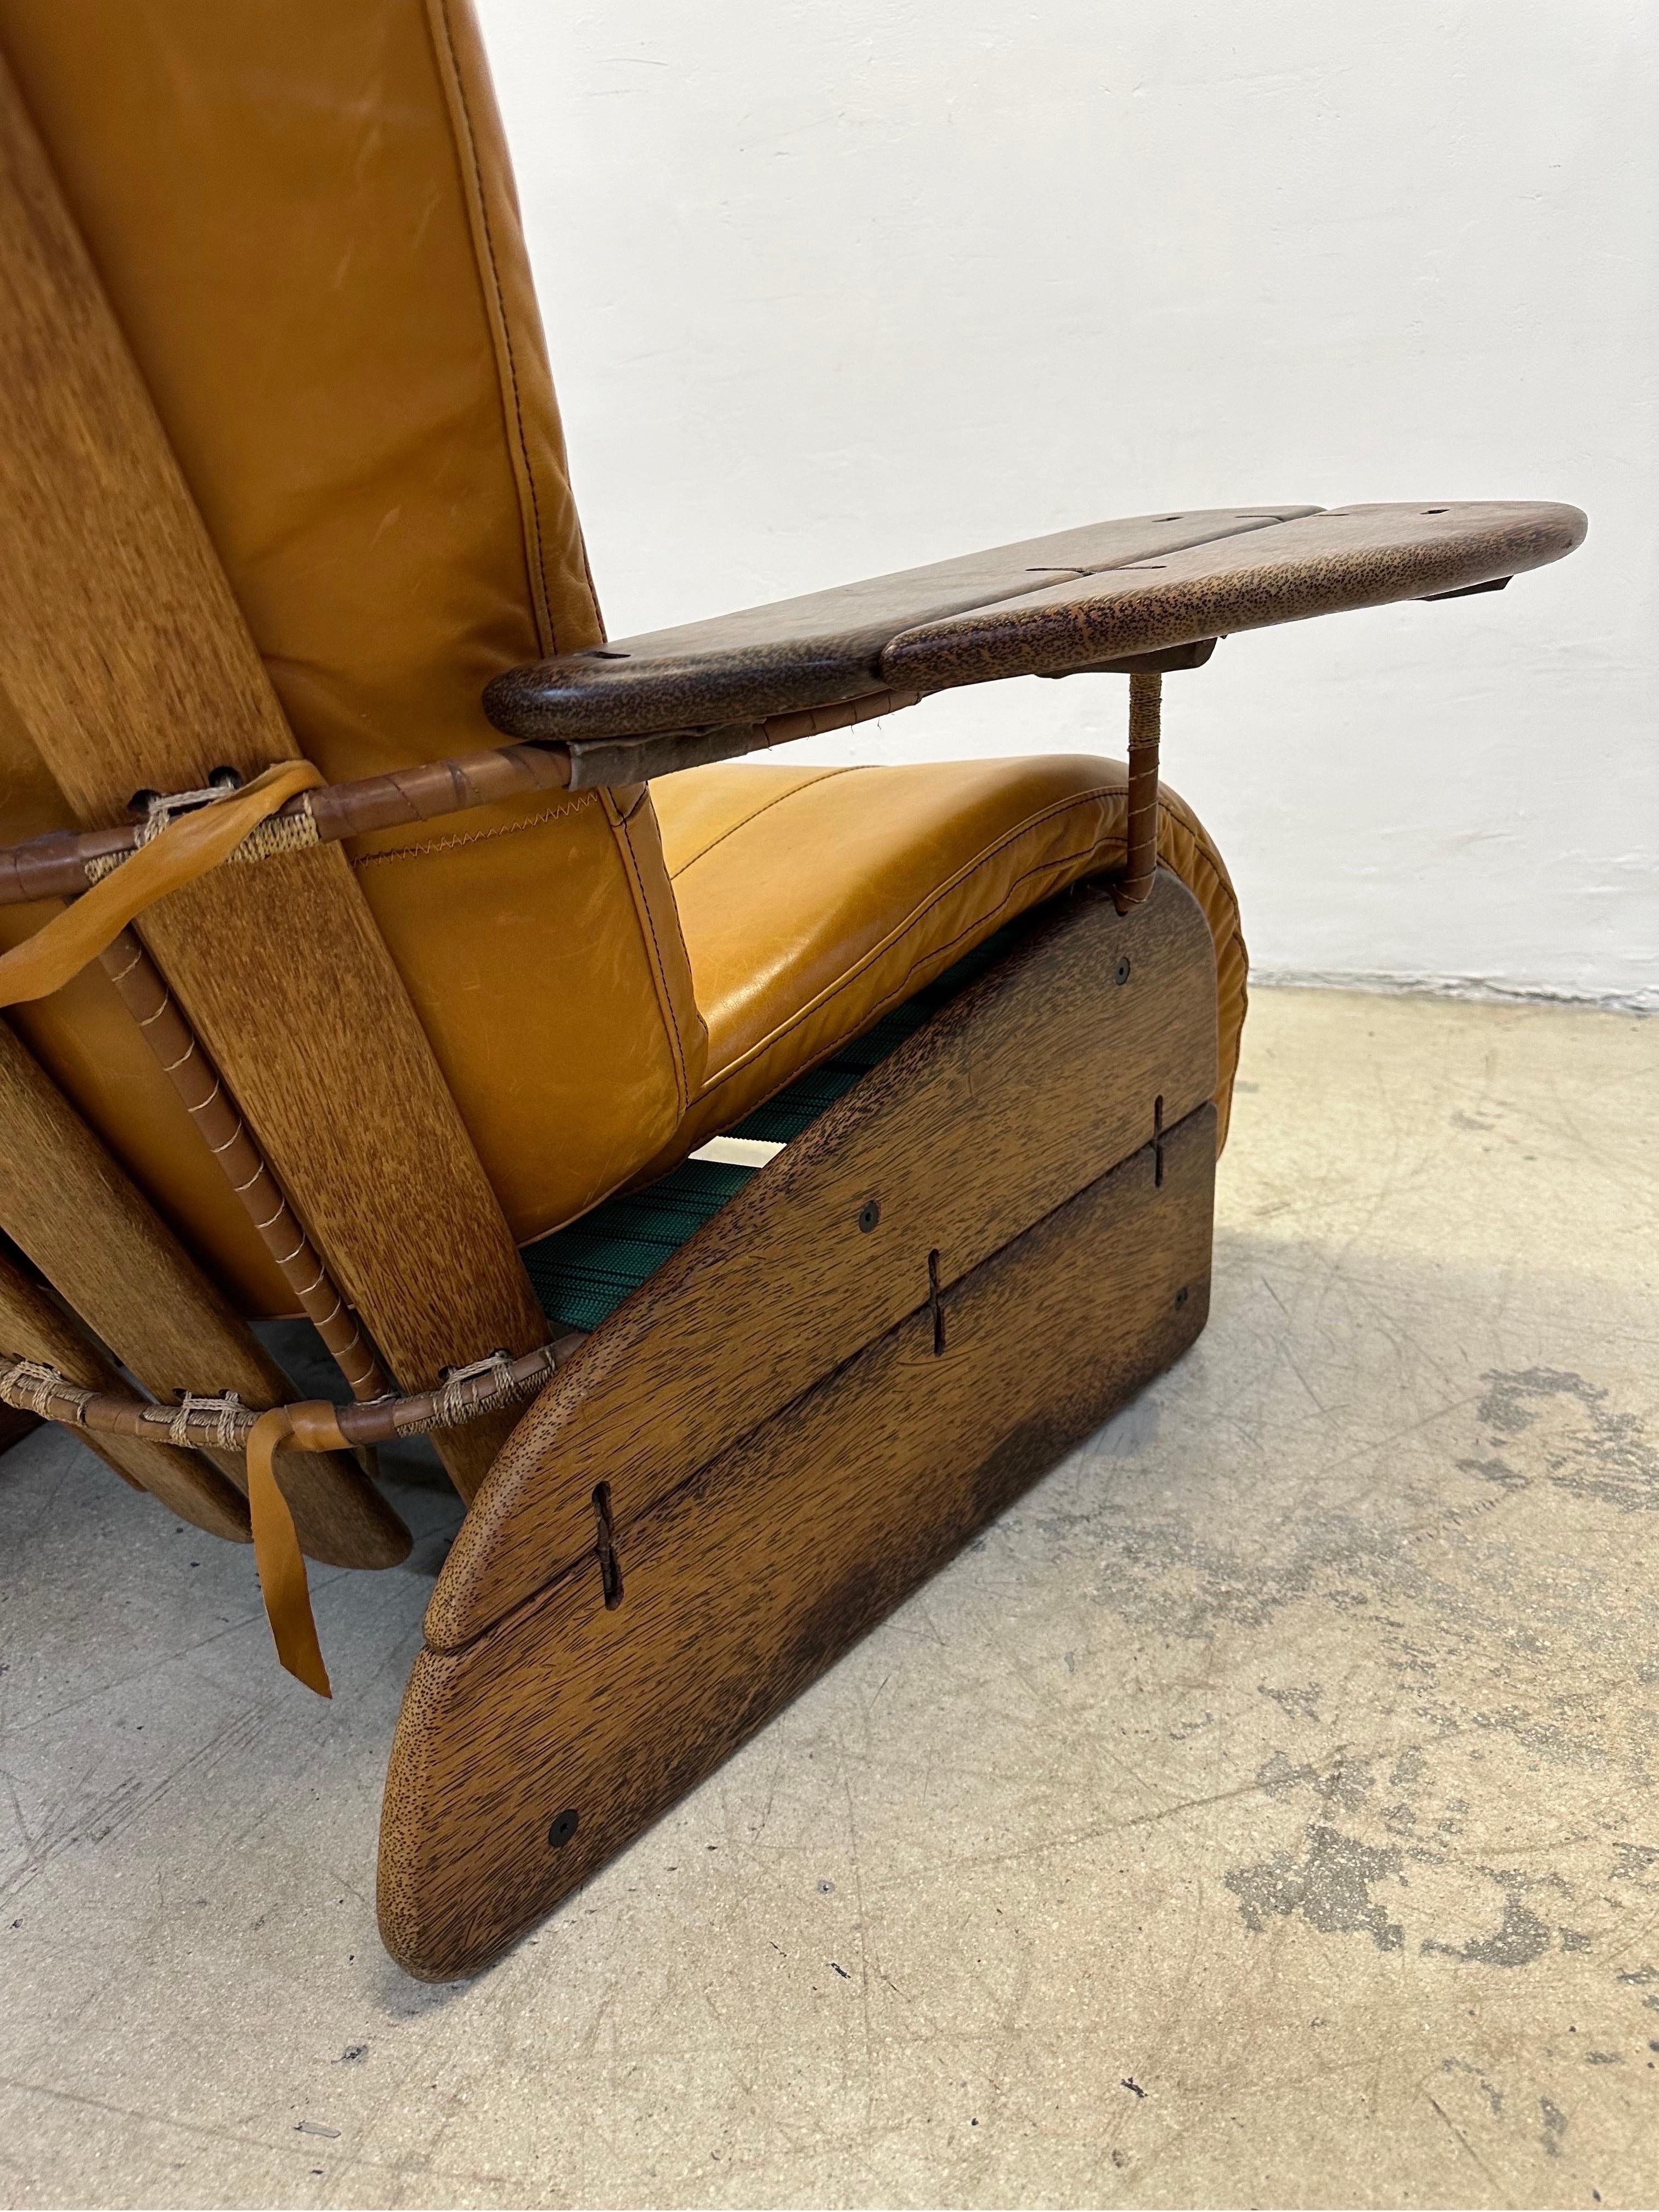 Pacific Green Havana Palmwood and Leather Lounge Chair For Sale 7